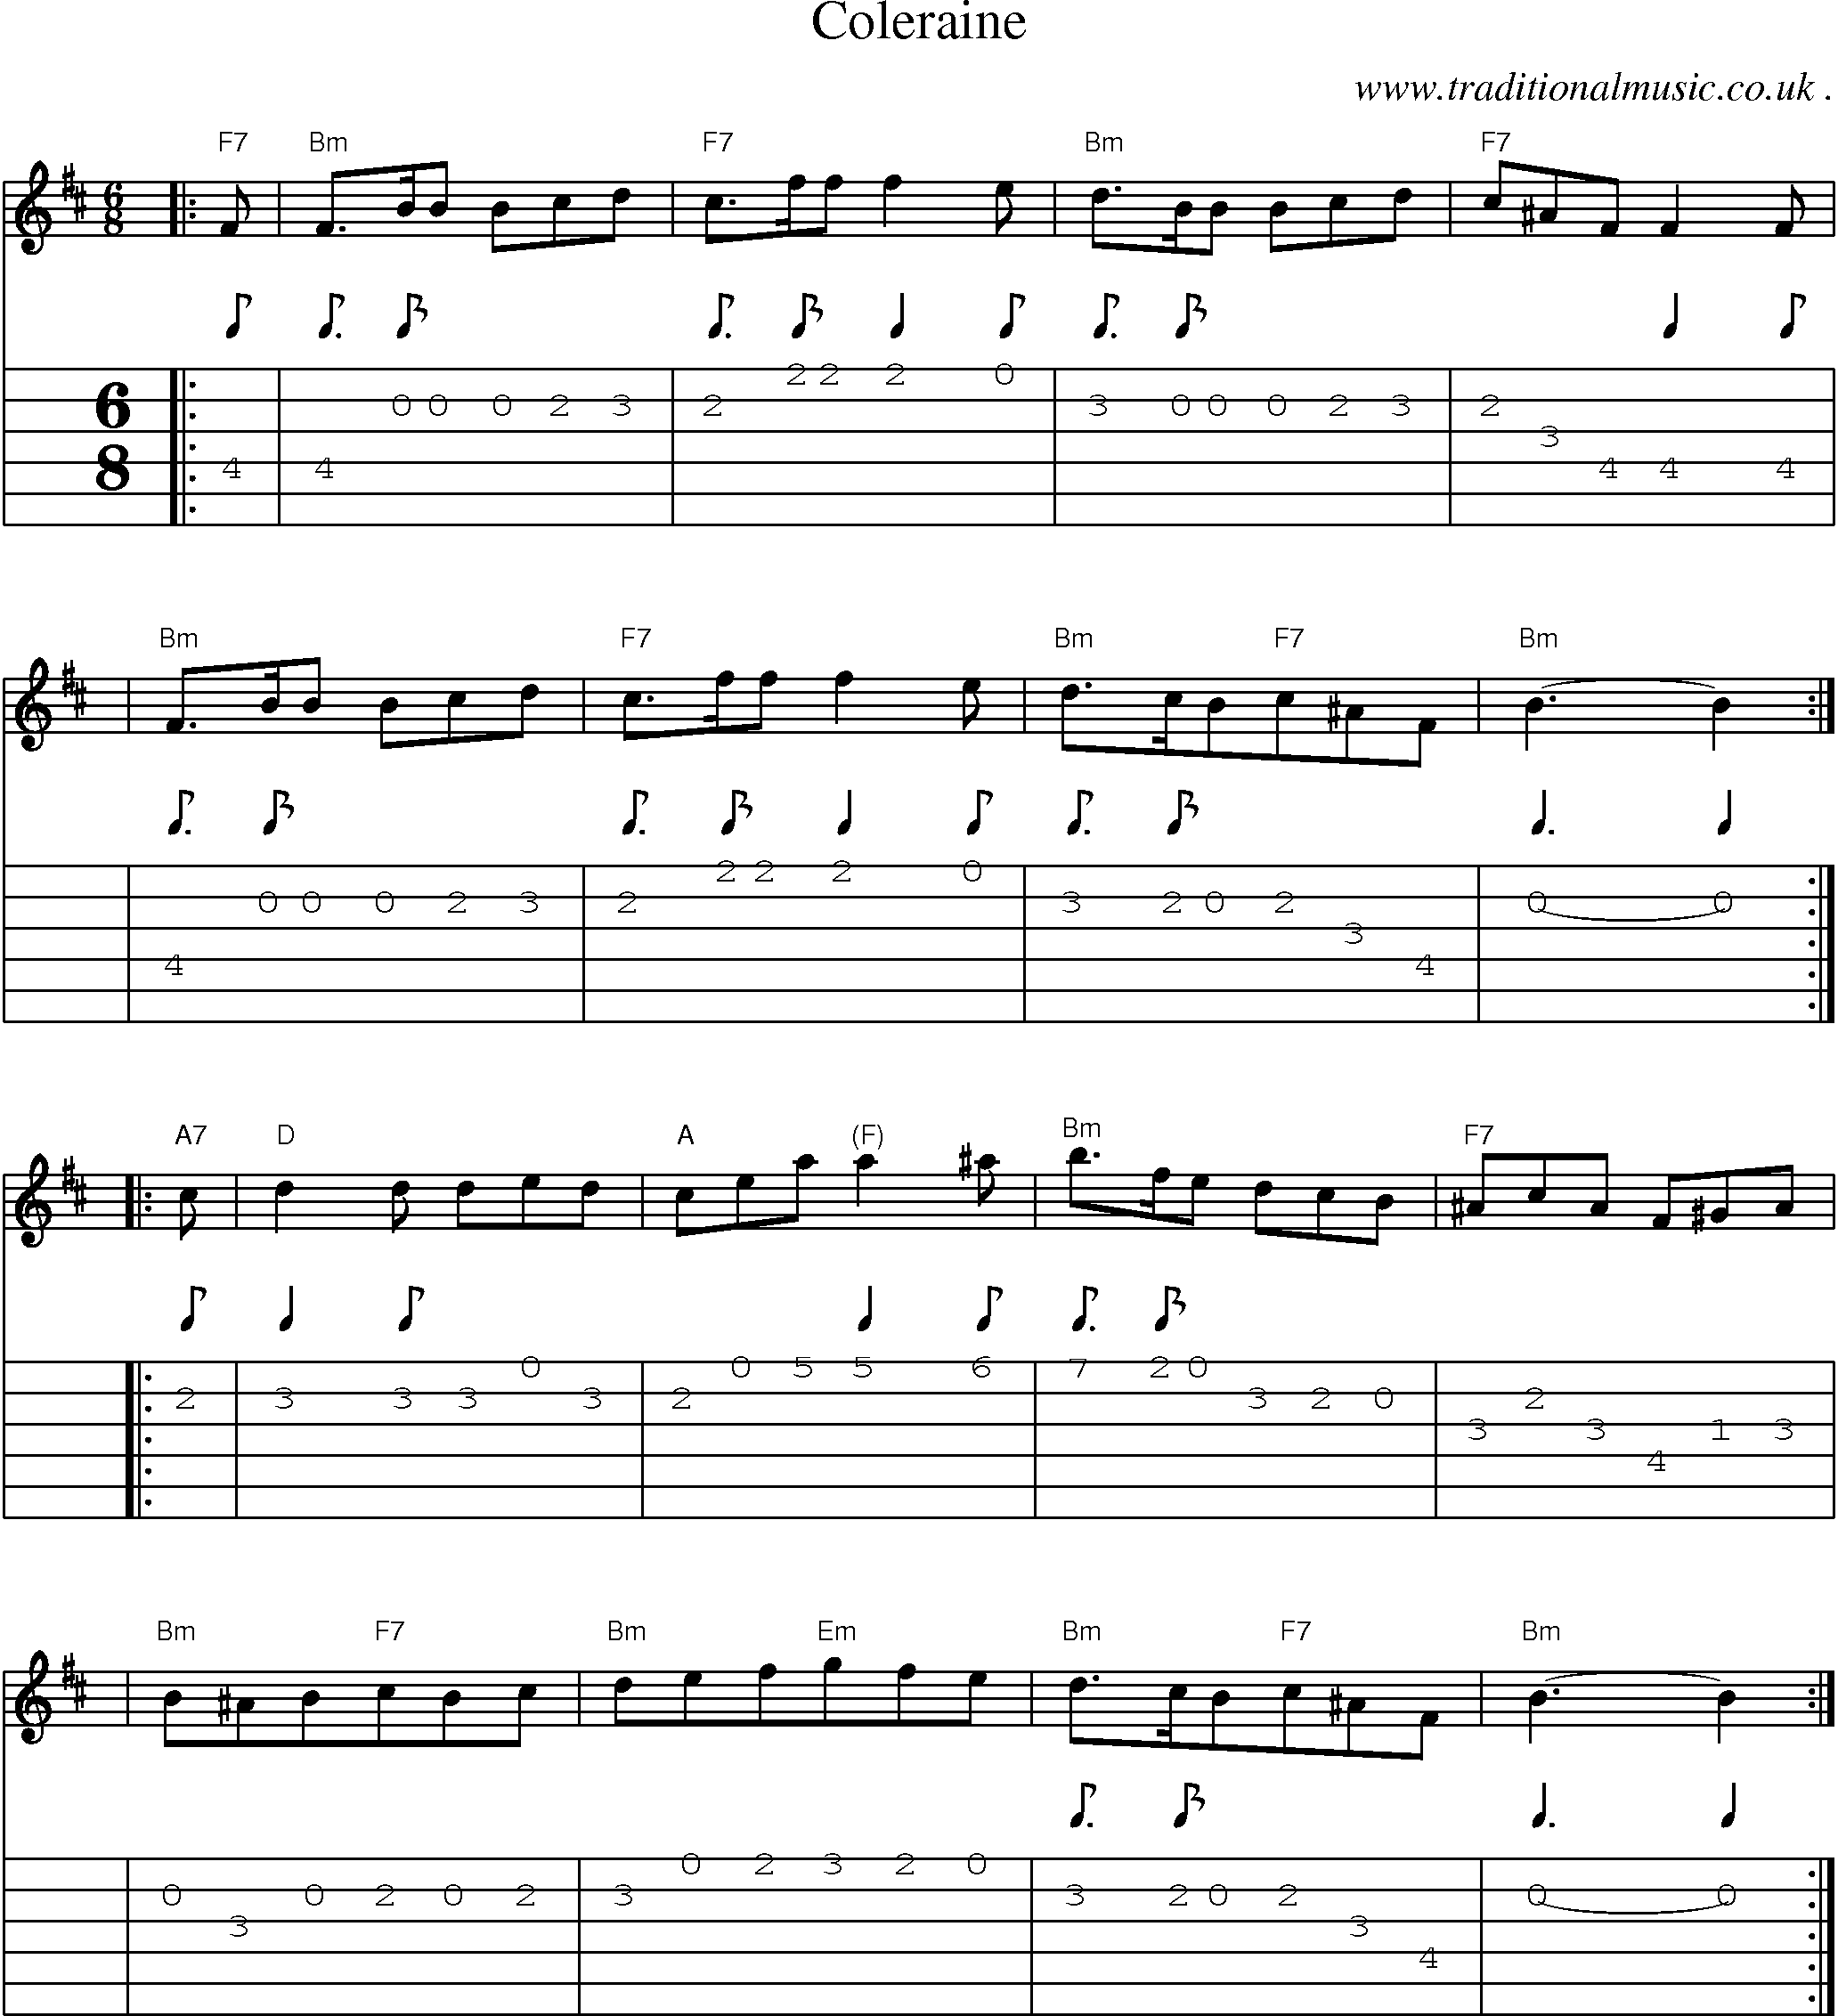 Sheet-Music and Guitar Tabs for Coleraine